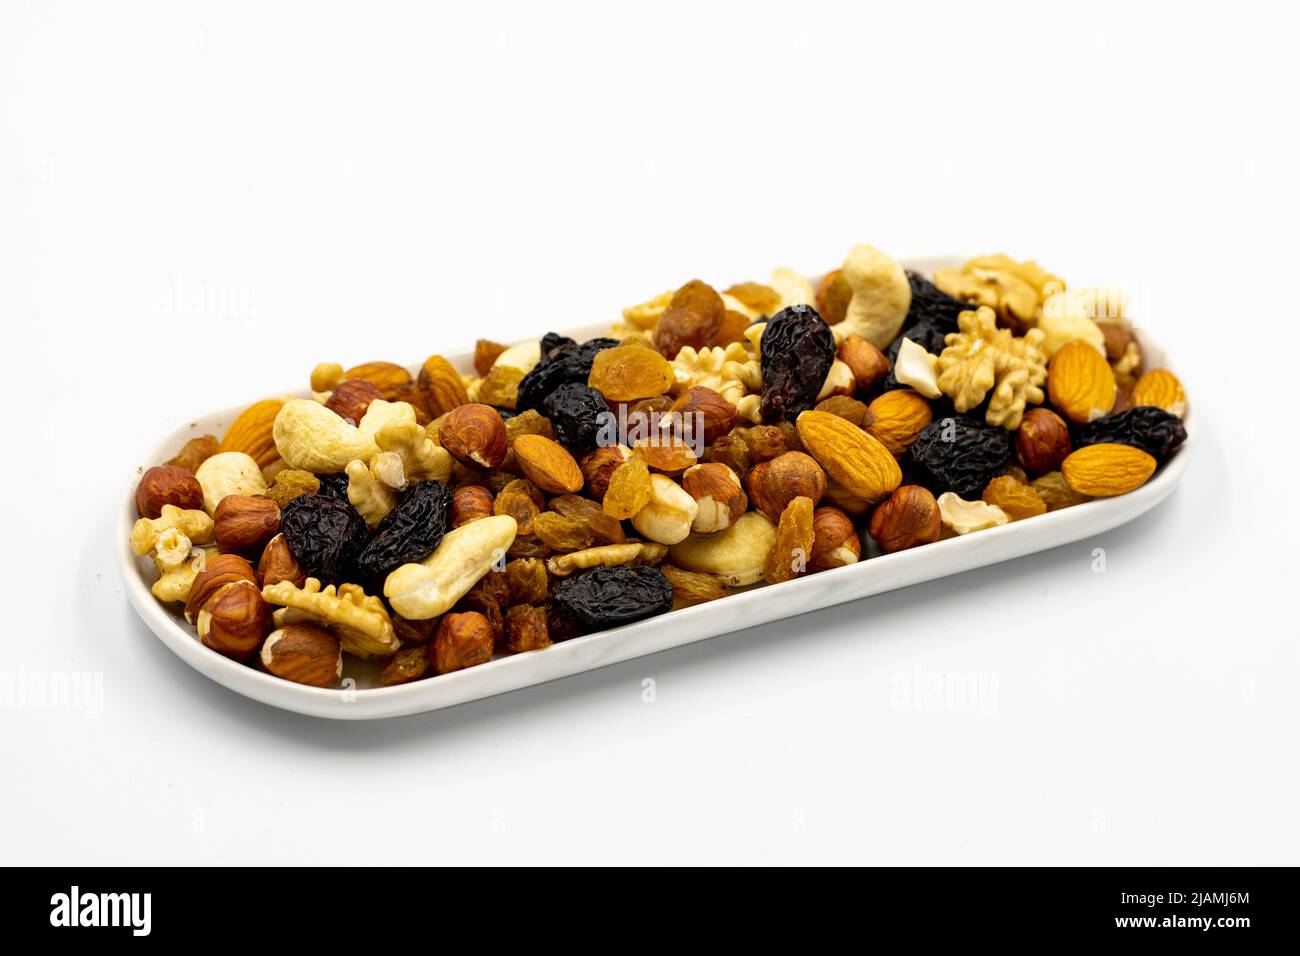 Mixed nuts on white background. Nuts, walnuts, raisins and cashews. close up Stock Photo